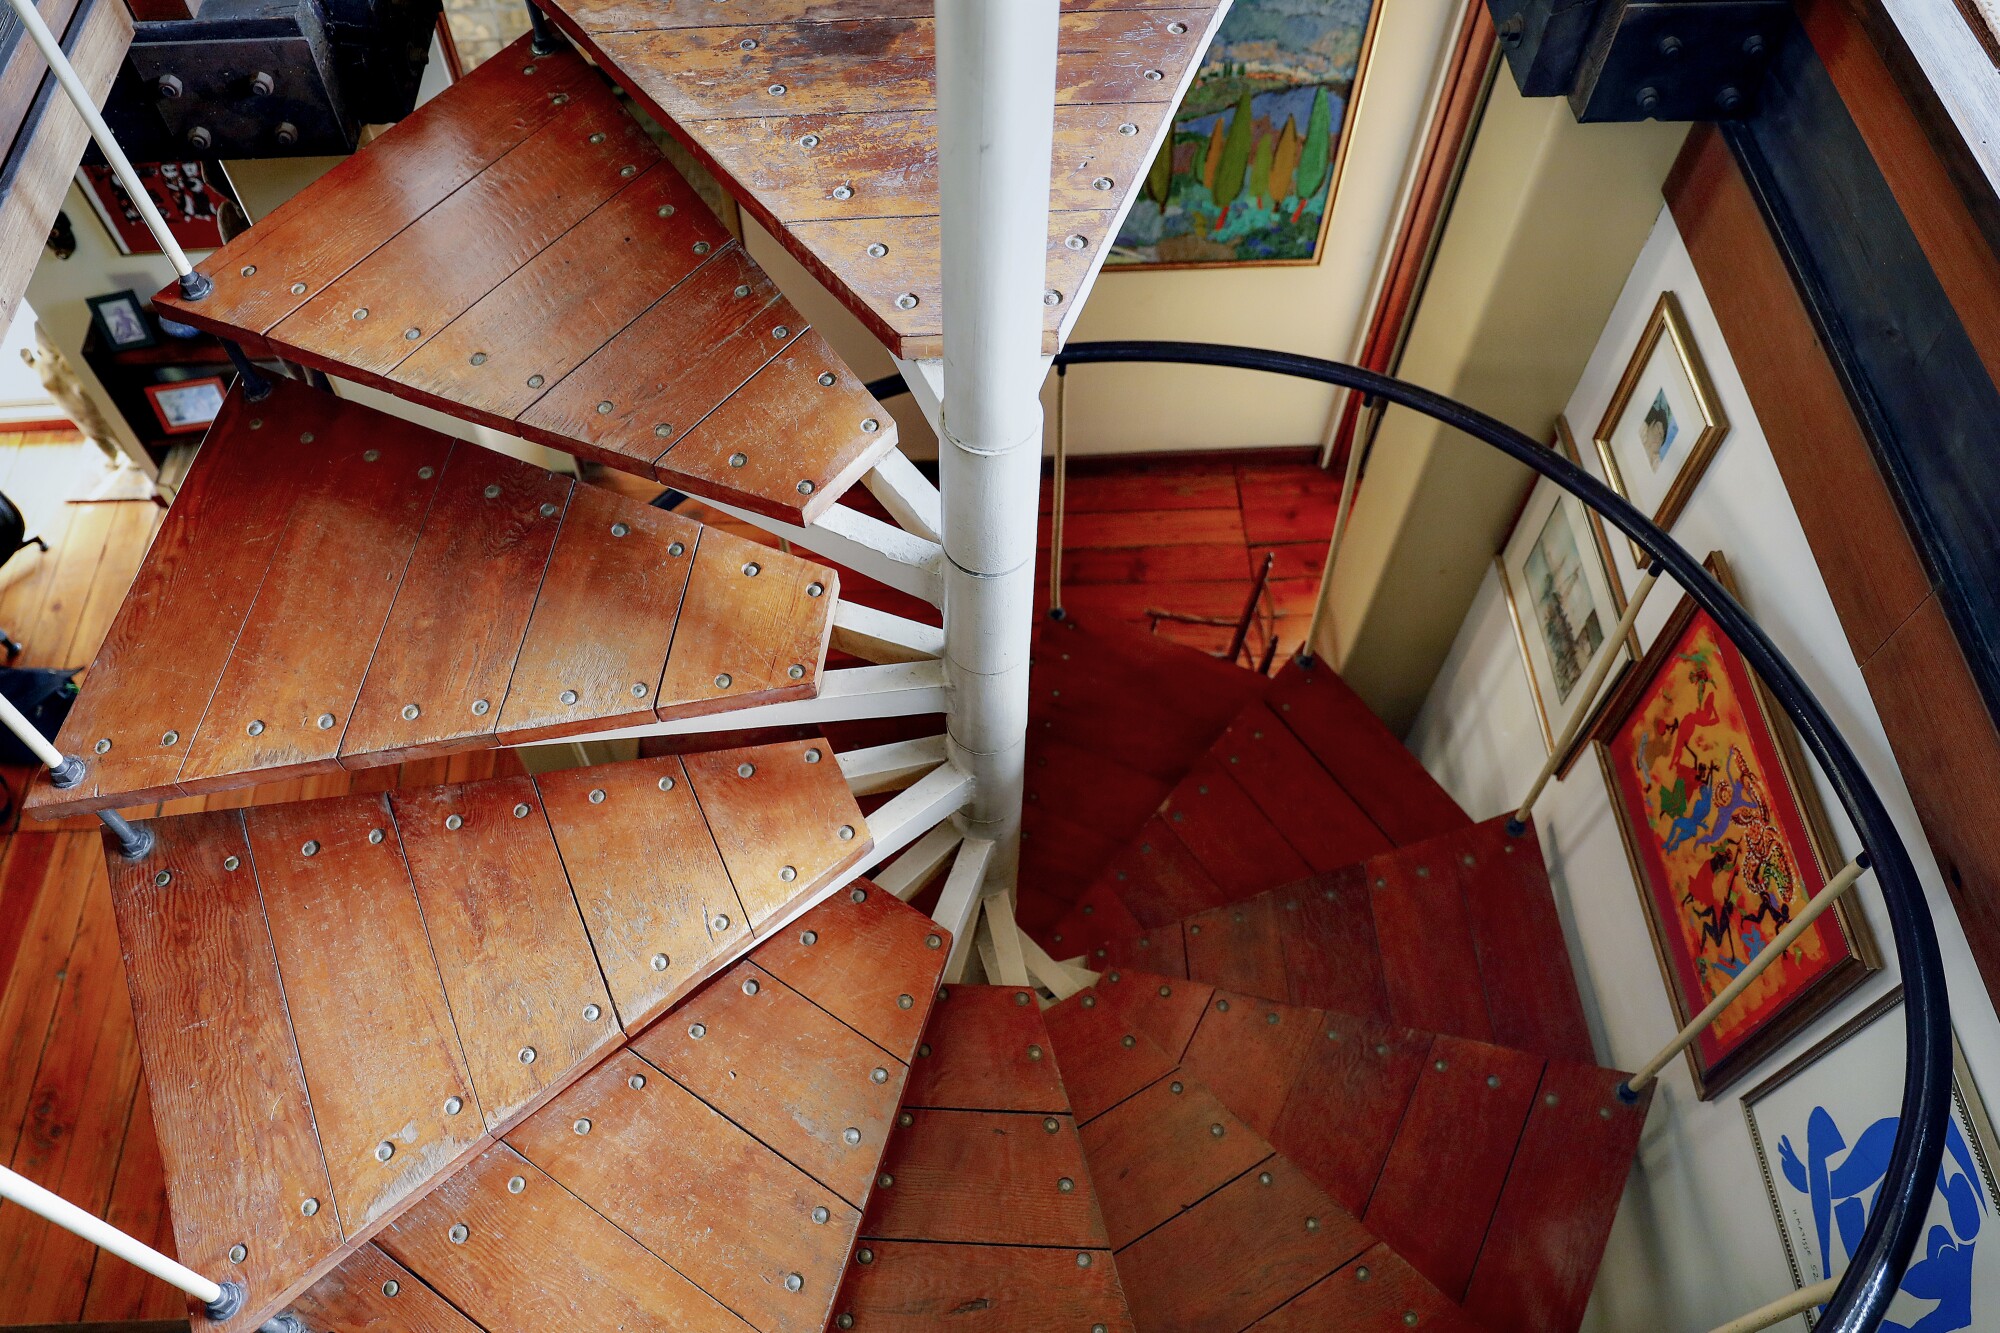 The wooden spiral stairs in Bernard Judge's Tree House as seen from overhead